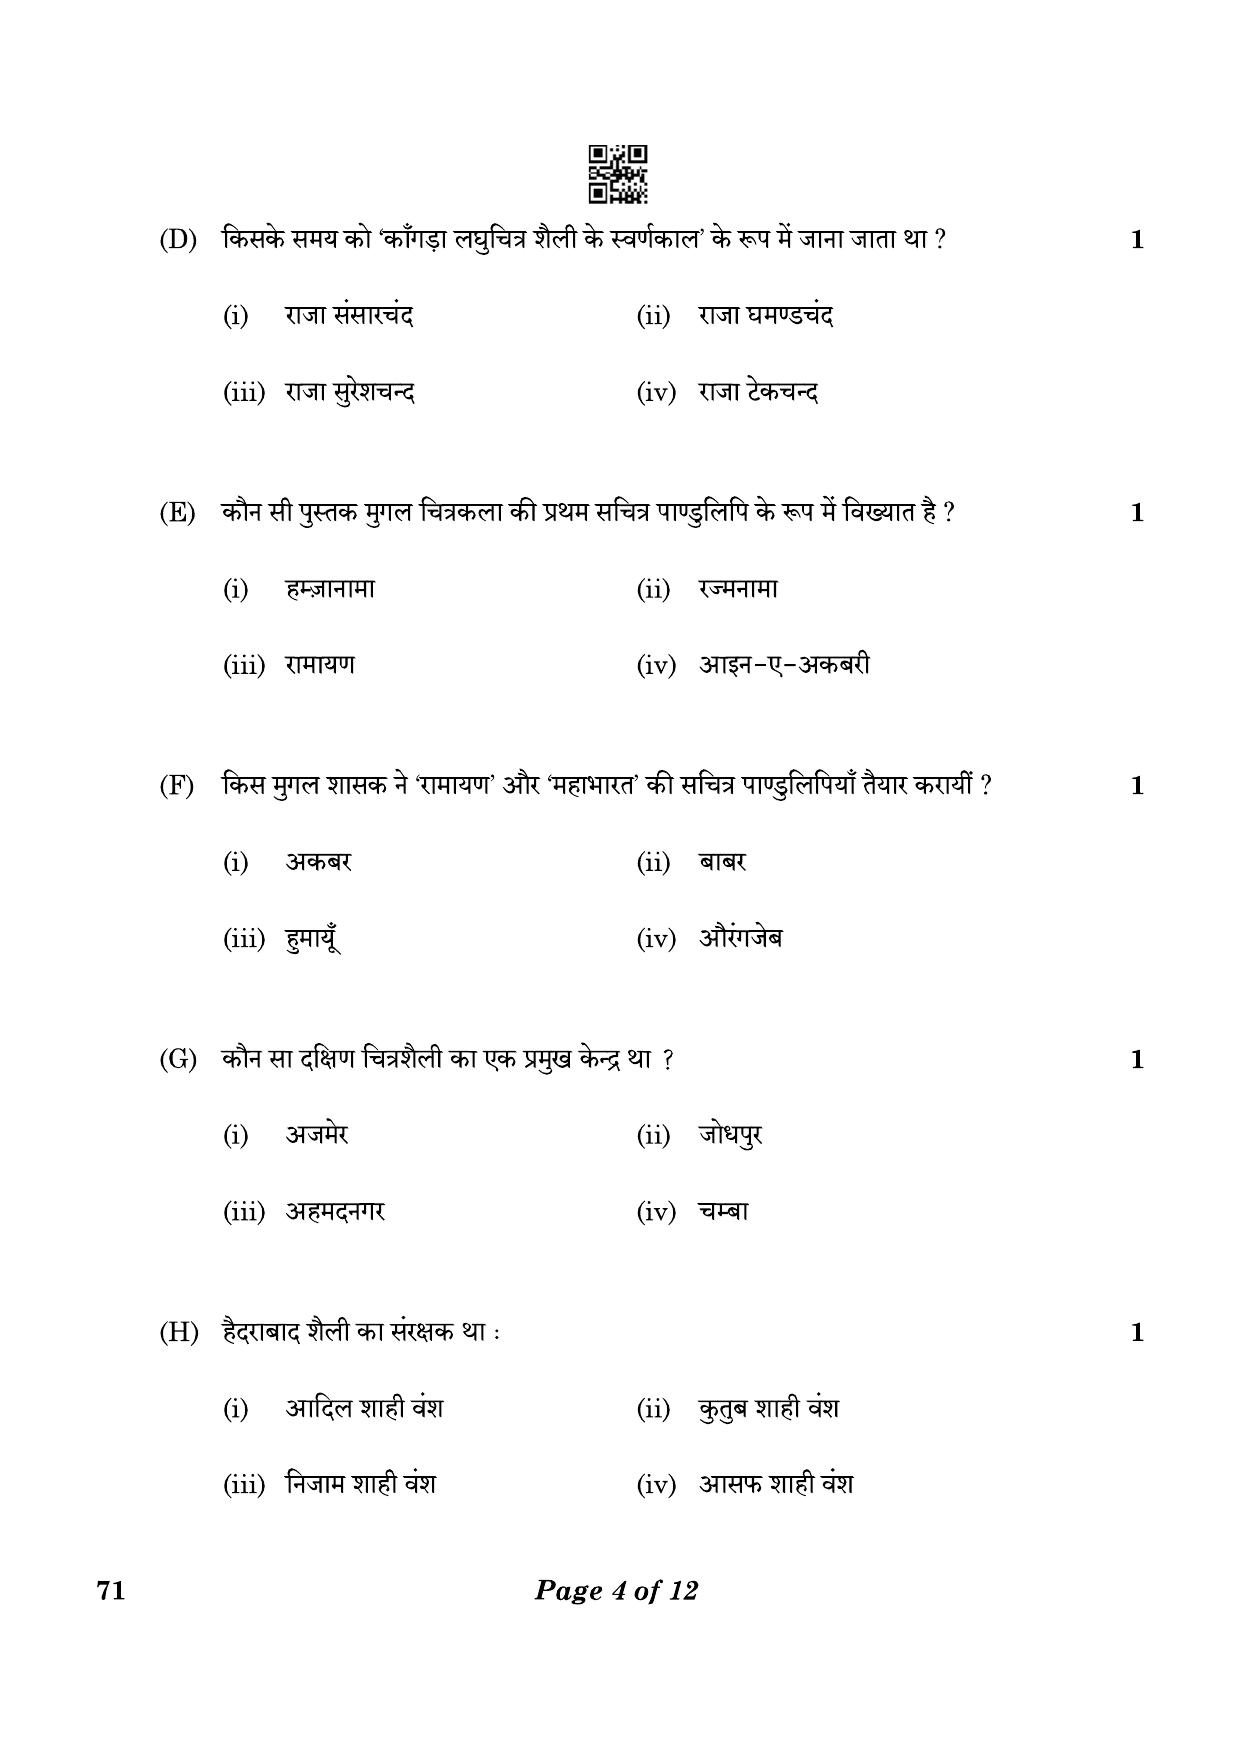 CBSE Class 12 71_Painting 2023 Question Paper - Page 4